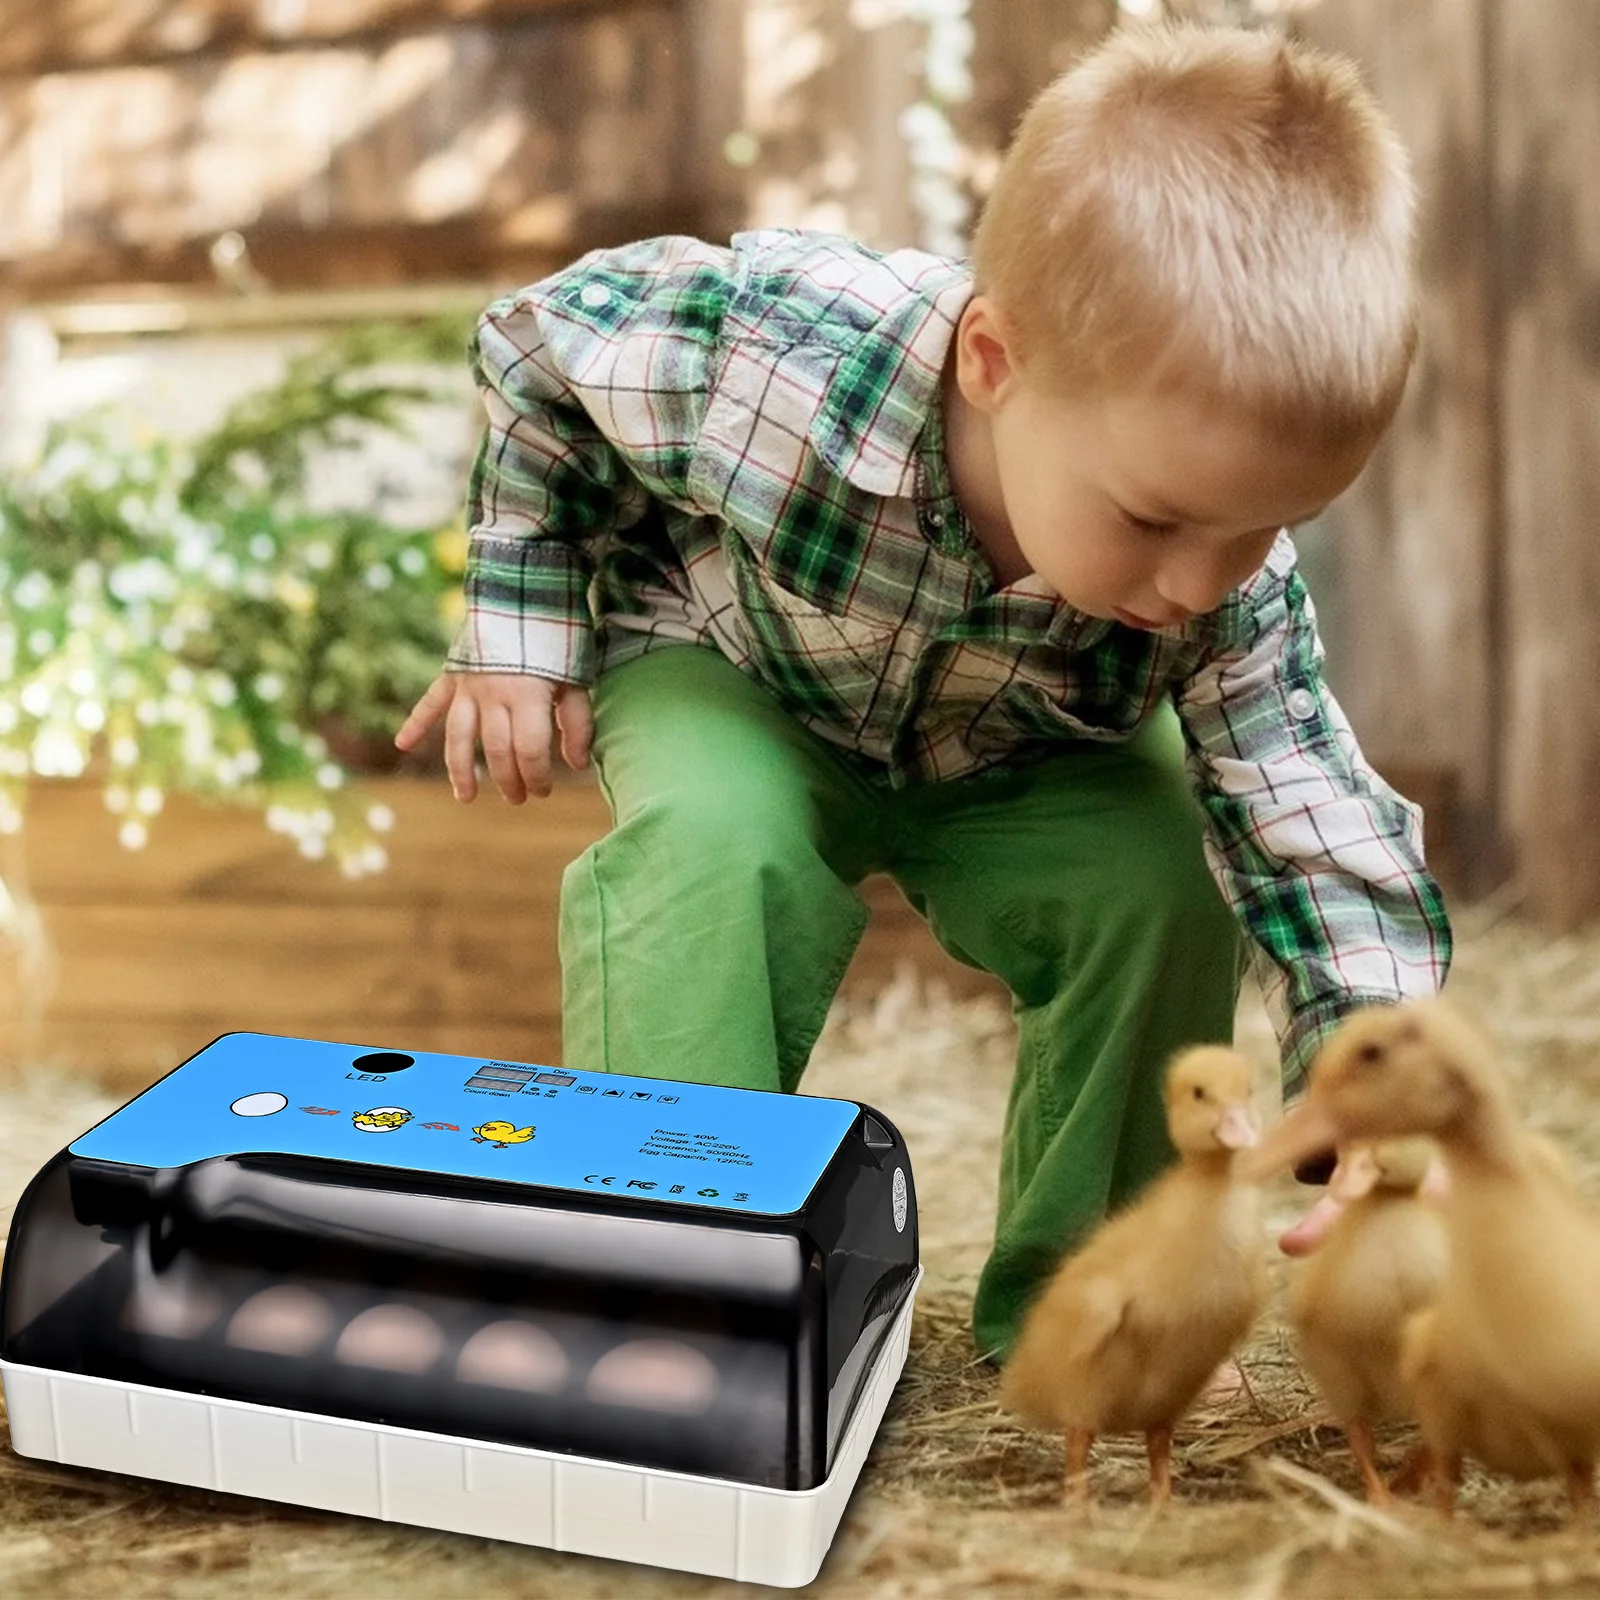 

9-35 Eggs Fully Automatic Digital Egg Incubator Poultry Hatcher Machine Chicken Incubators for Hatching Eggs Quail Duck Goose